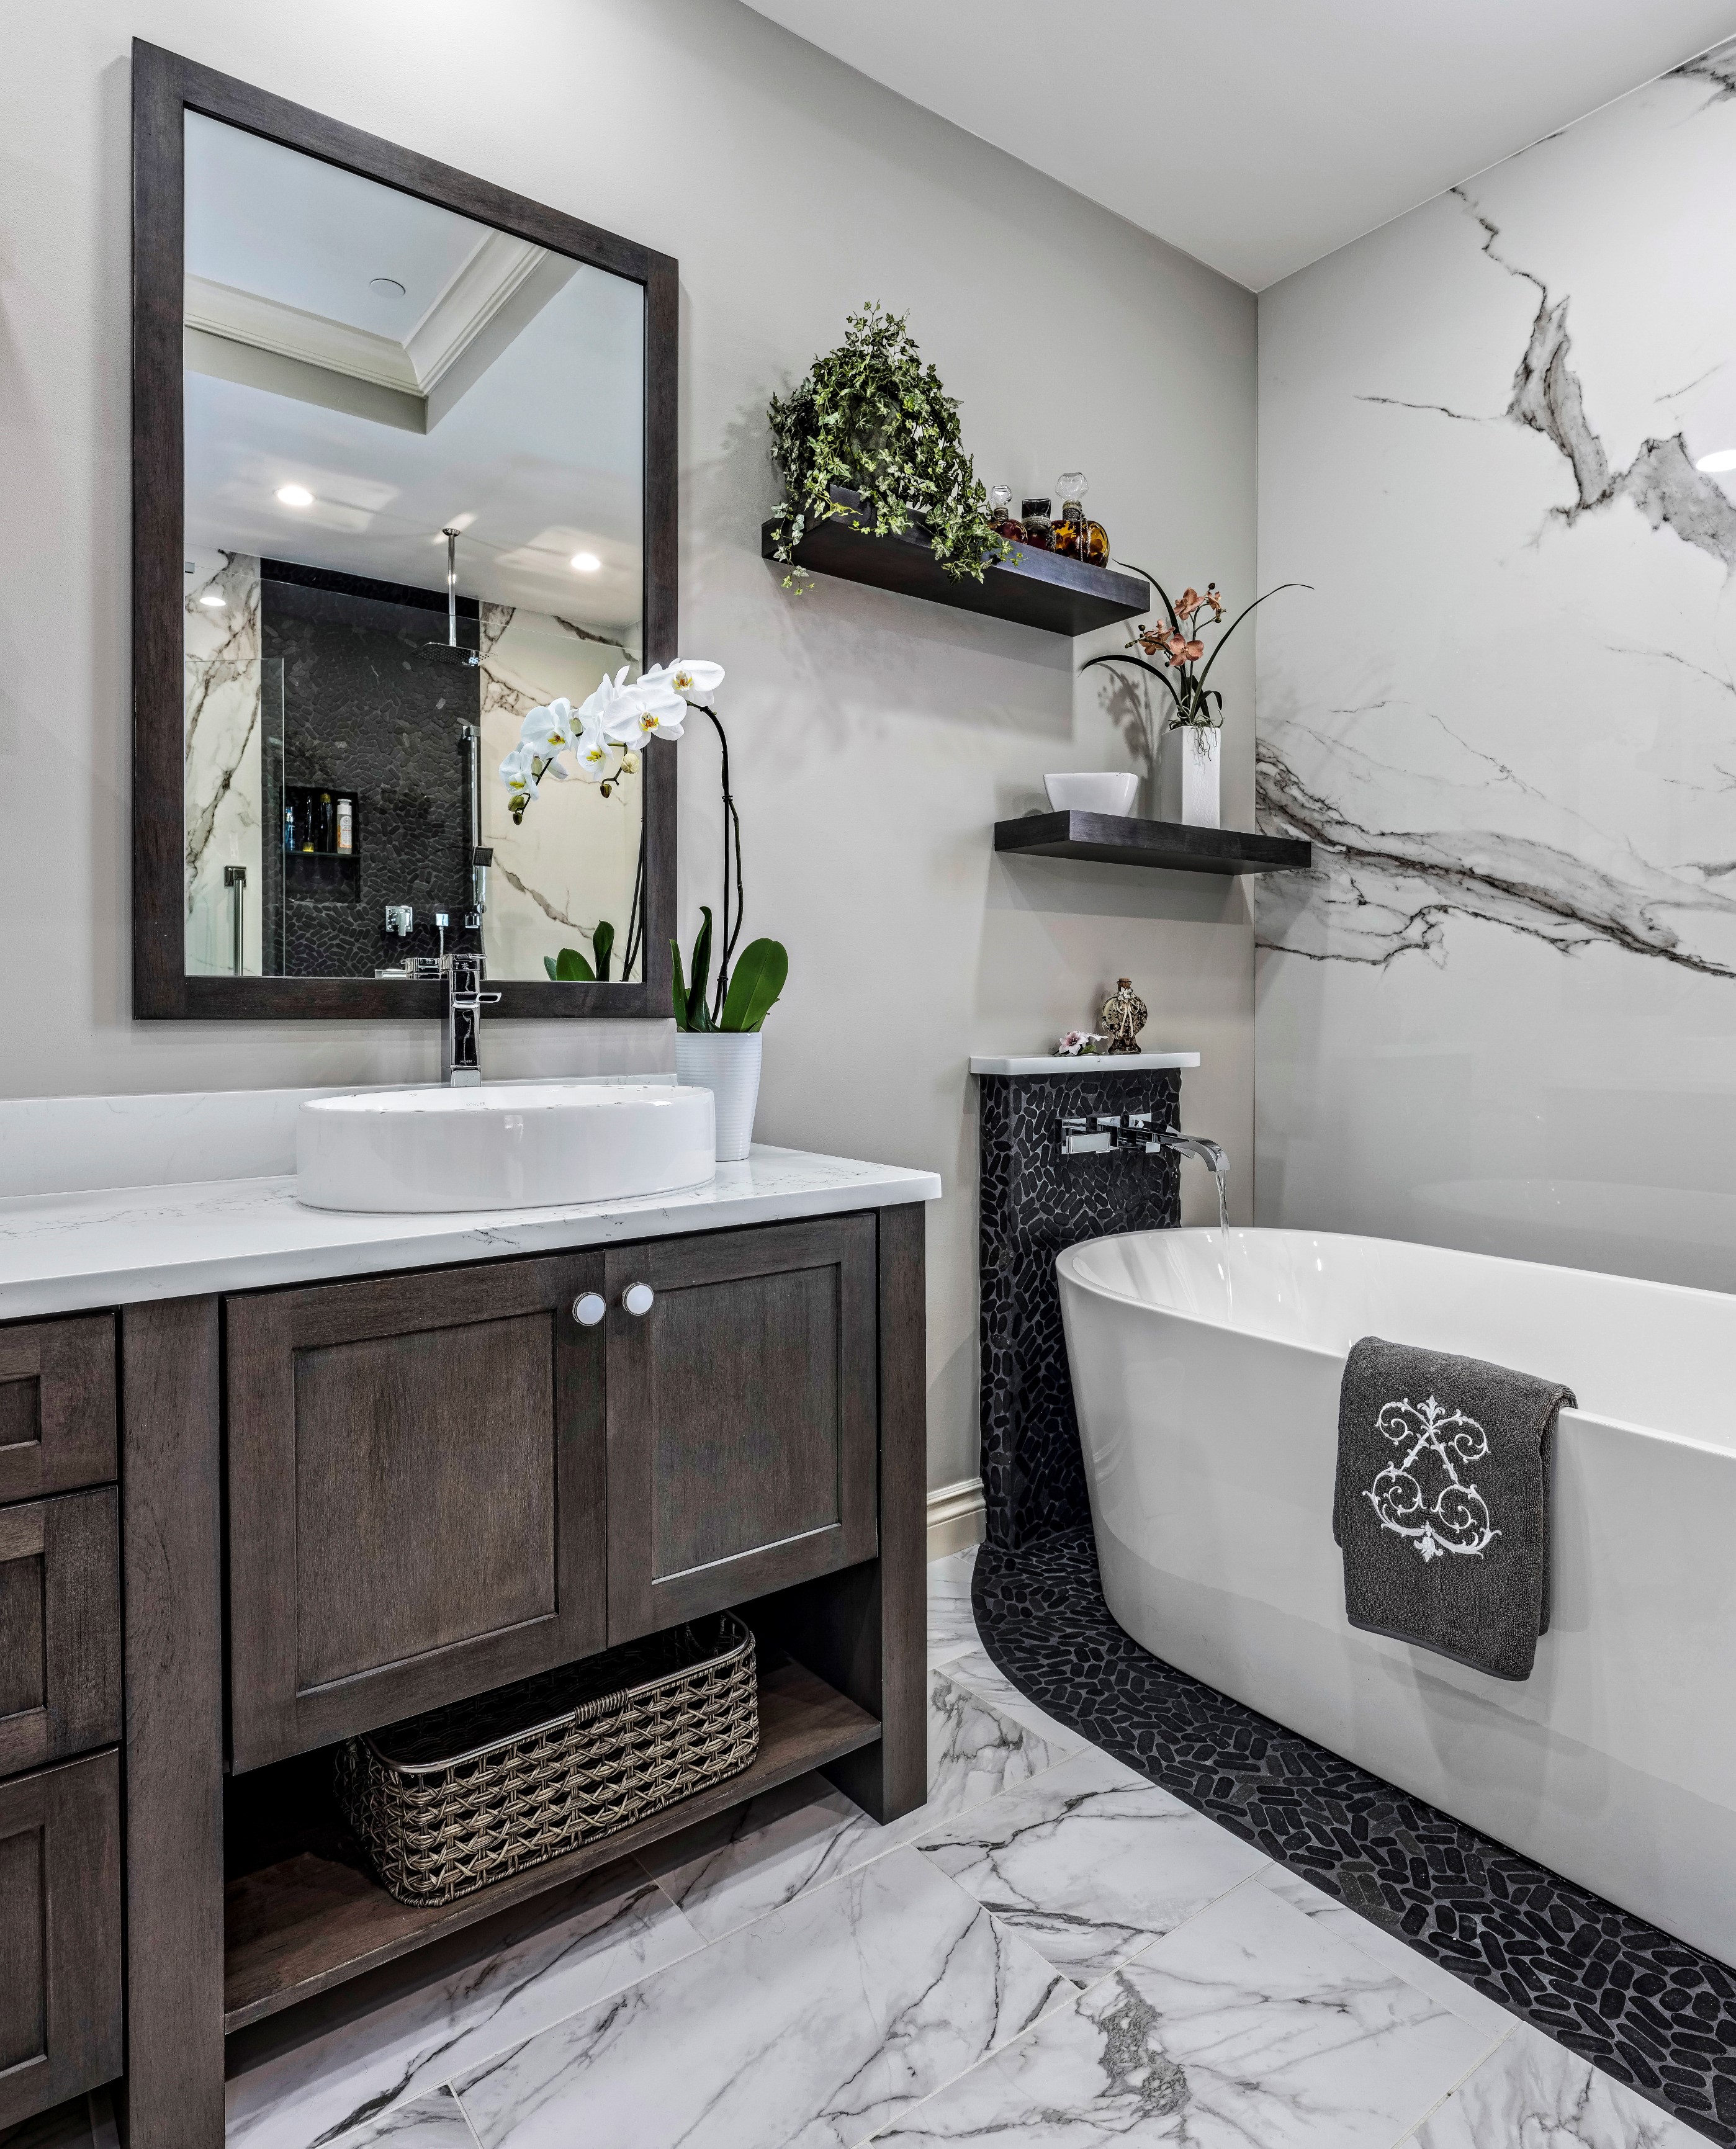 Bathroom Remodeling Typically Cost, How Much Does It Cost To Remodel An Entire Bathroom